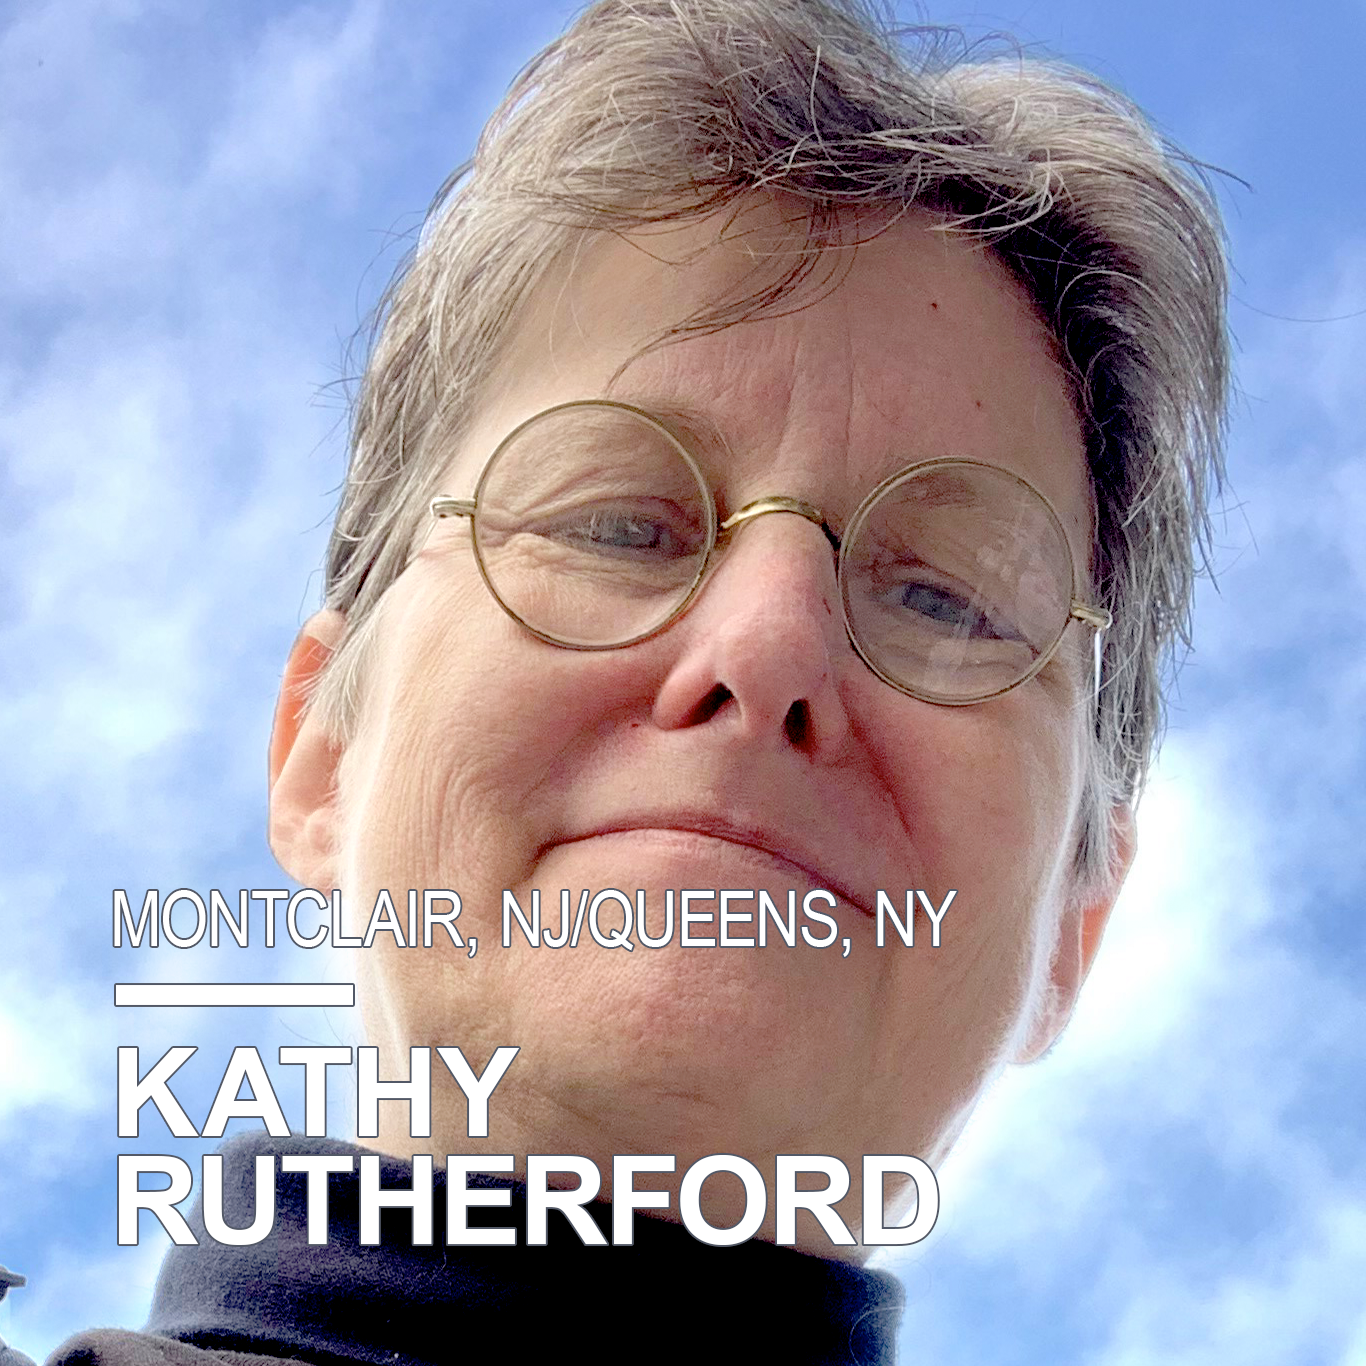 Kathy Rutherford, a retired biomedical engineer, volunteers full-time as a robotics coach and mentor in northern NJ and Queens, NY. She mentors FIRST® robotics teams; judges FIRST, WRO, and Science Olympiad competitions; and is an engineering mentor for the Girl Scouts of Greater New York. She has a bachelor’s in Electrical Engineering and a master’s in Biomedical Engineering and has been profiled in IEEE Women in Engineering and IEEE Robotics and Automation. Kathy believes that “engineering is the coolest profession that no one has ever heard of” and loves inspiring kids by exposing them to robotics and technology careers.